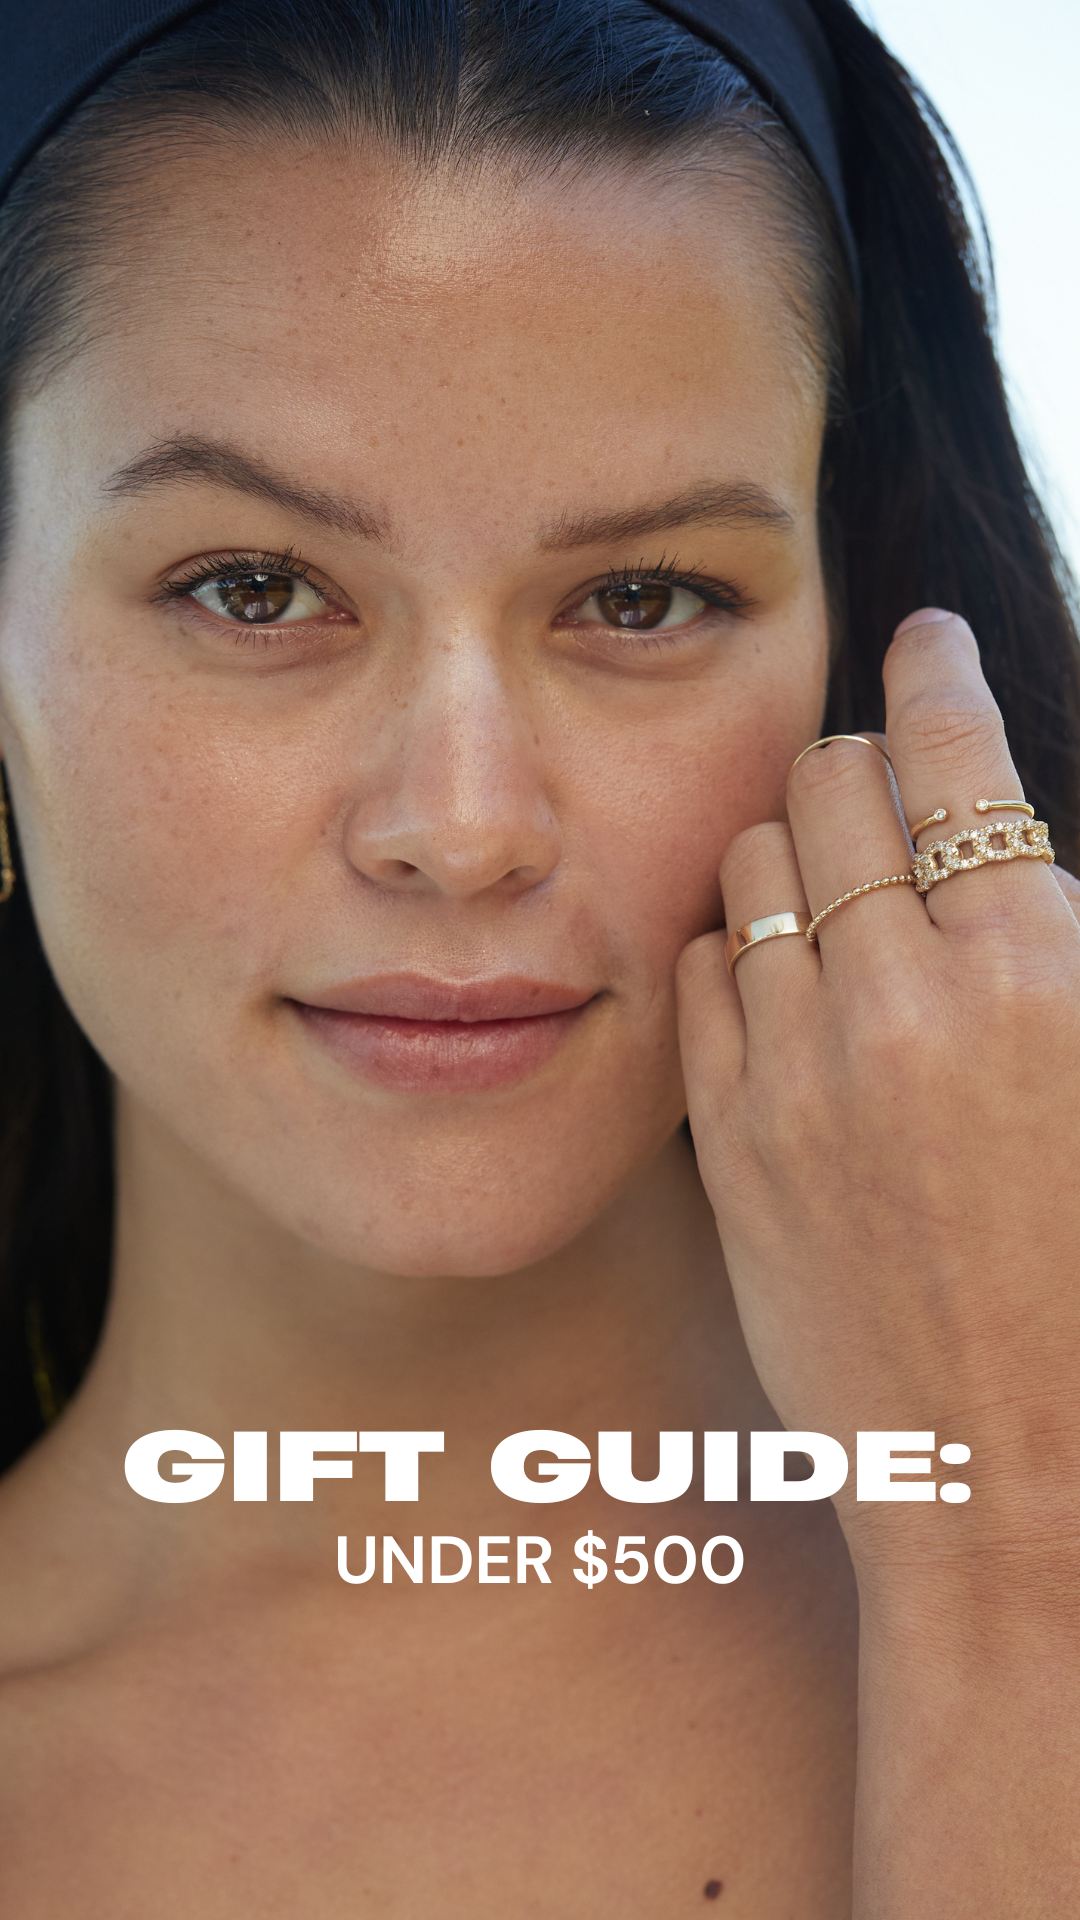 Gift Guide: Under $500